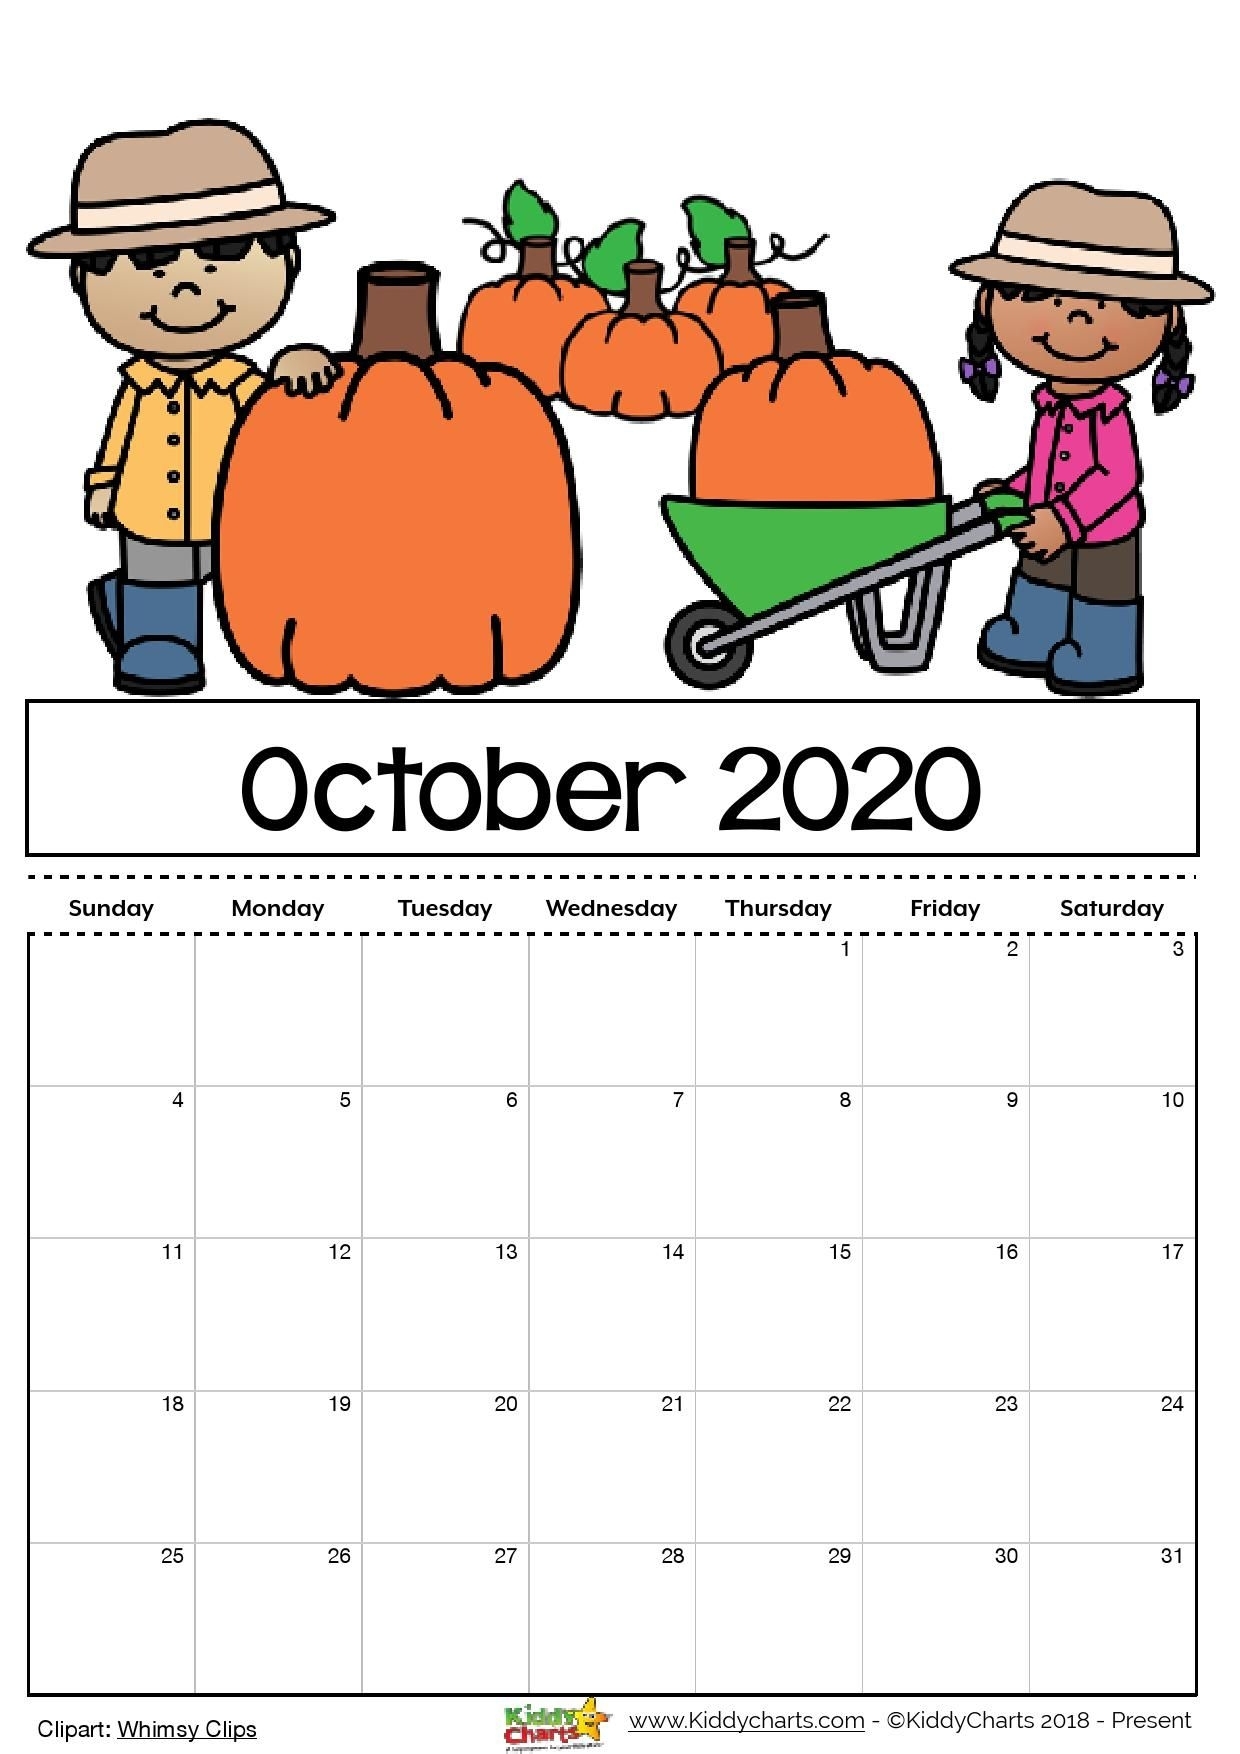 Check Out Our Free Editable 2020 Calendar Available For pertaining to Free Printable Children Calendars 2020 That Children Can Draw On